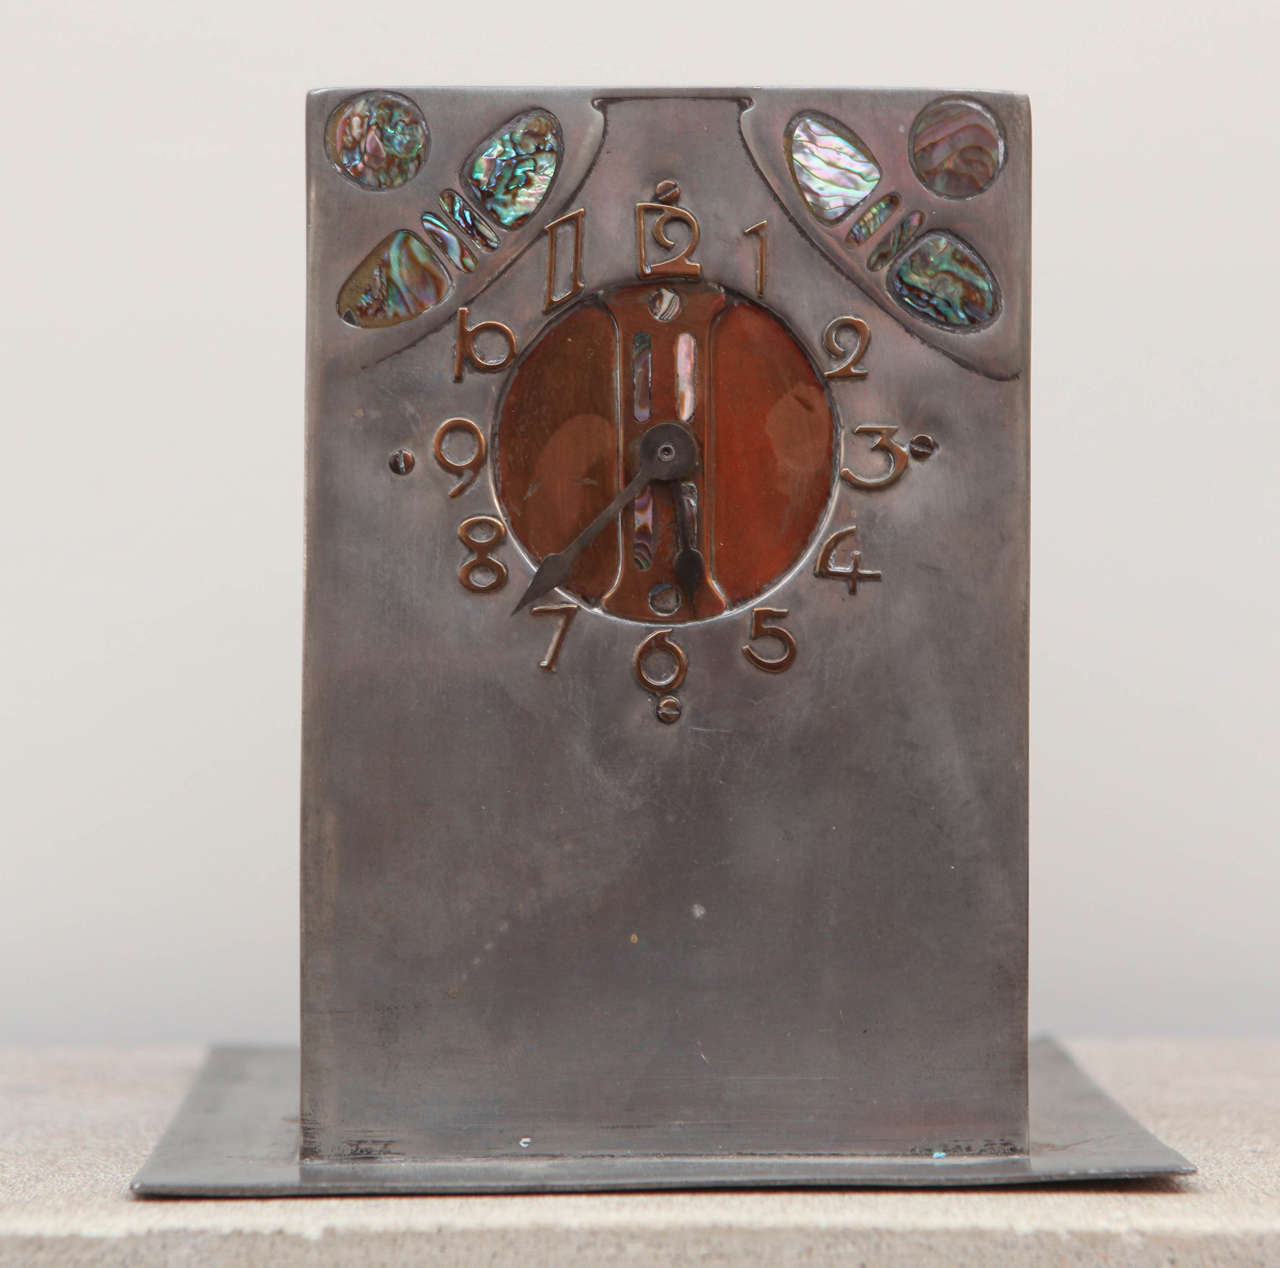 Liberty & Co. hand-wrought pewter, copper and abalone clock, British, circa 1905.

Original wind-up key included. Clock is in working condition.